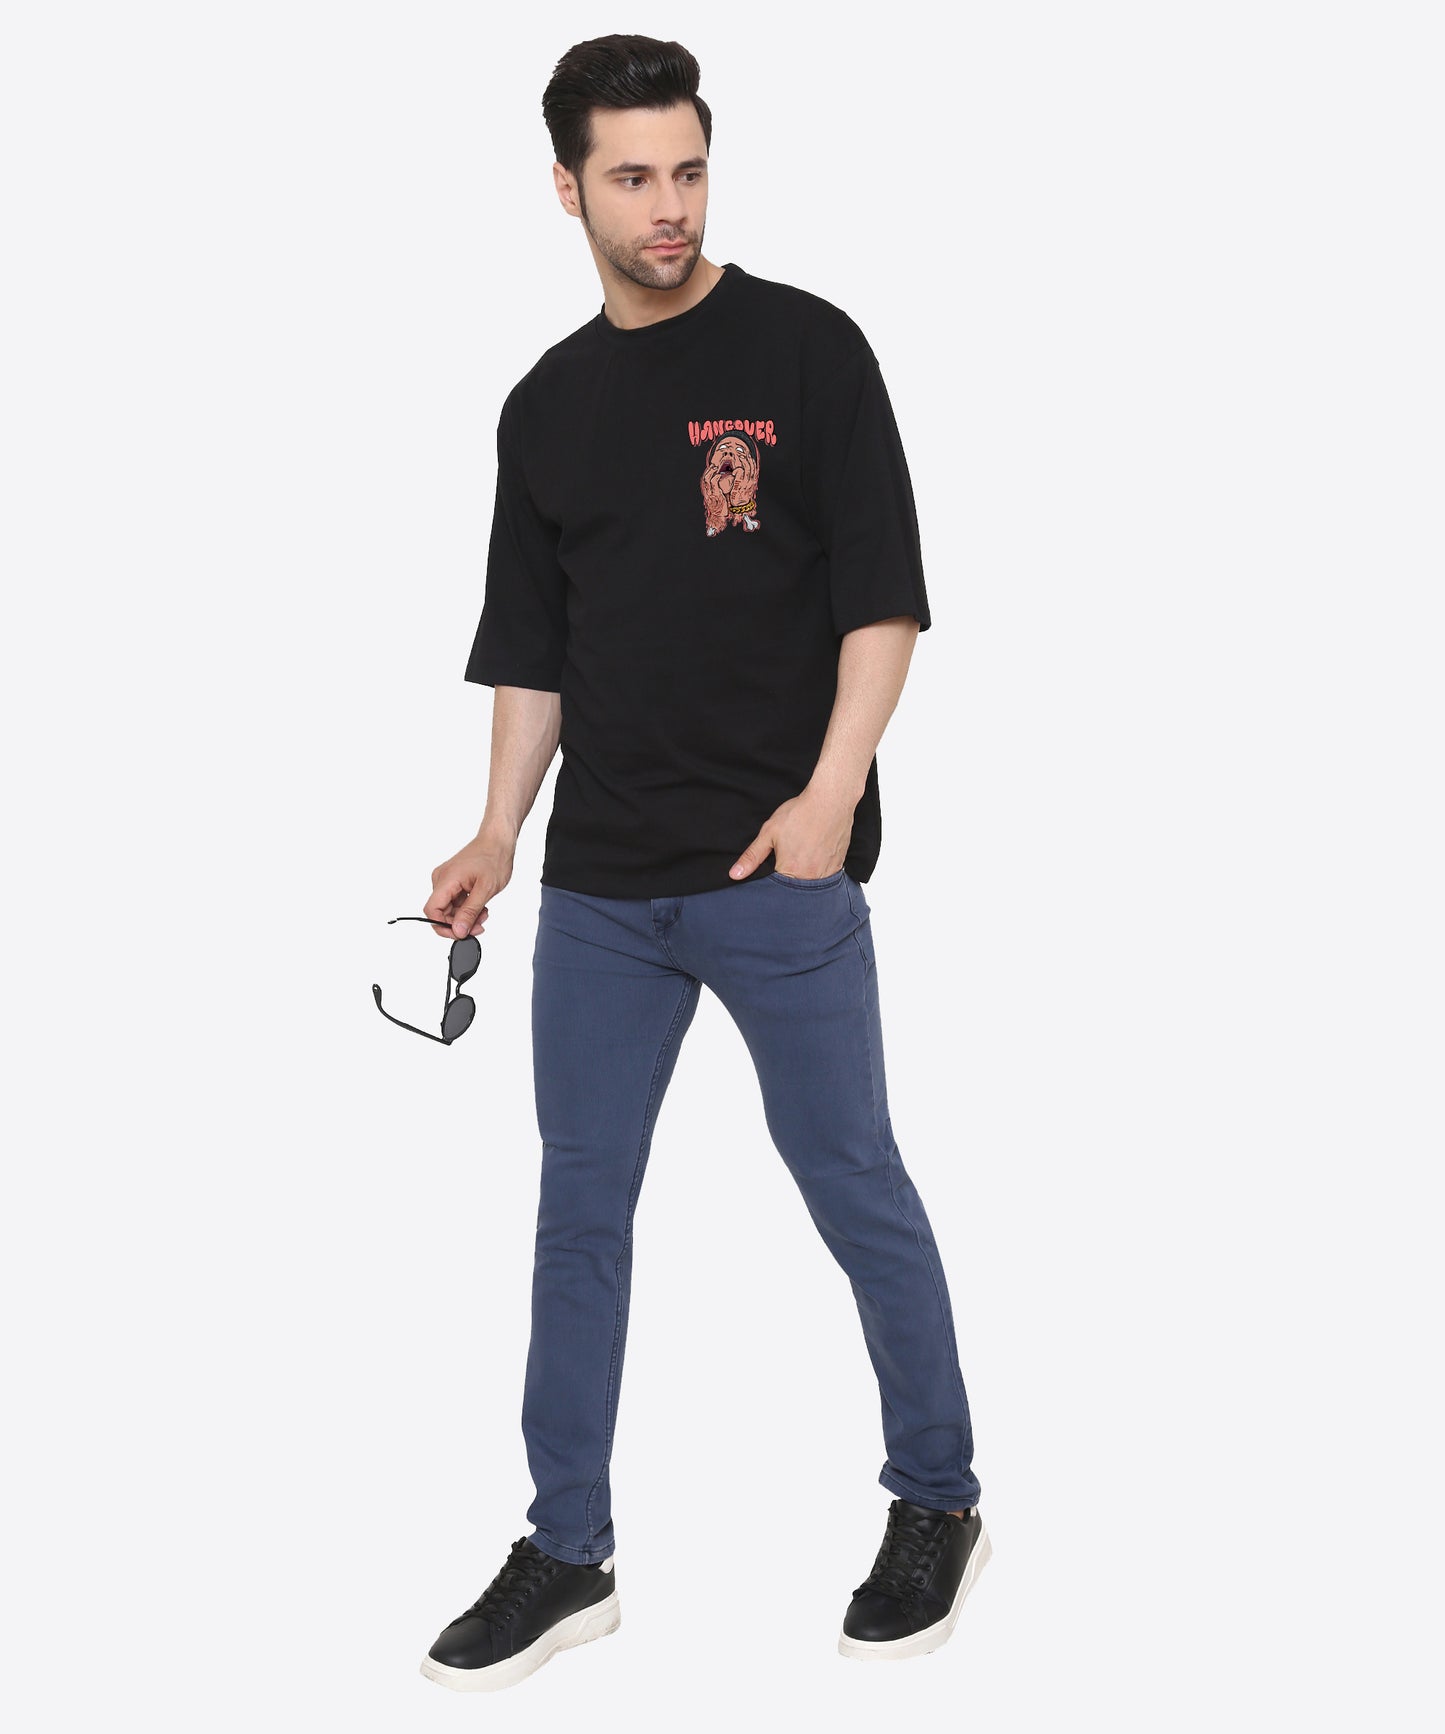 Oversized Cotton T-shirts Relaxed Fit Tees for Men